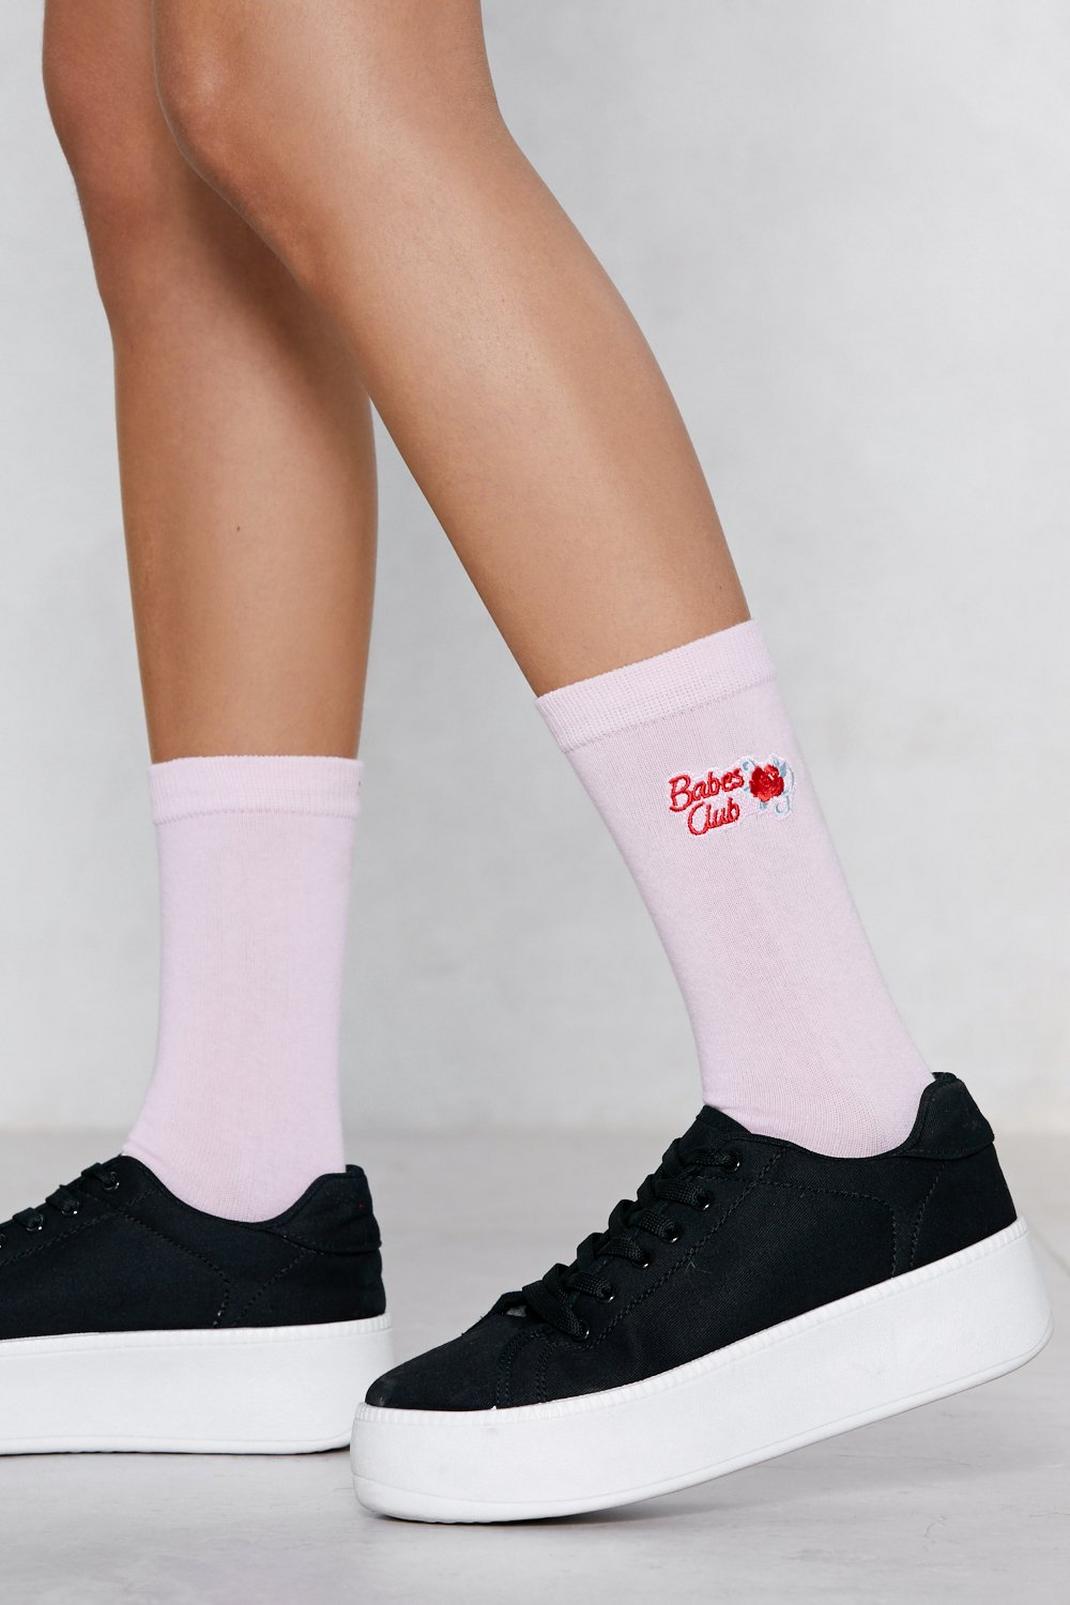 Babes Club Sock 3-Pack image number 1